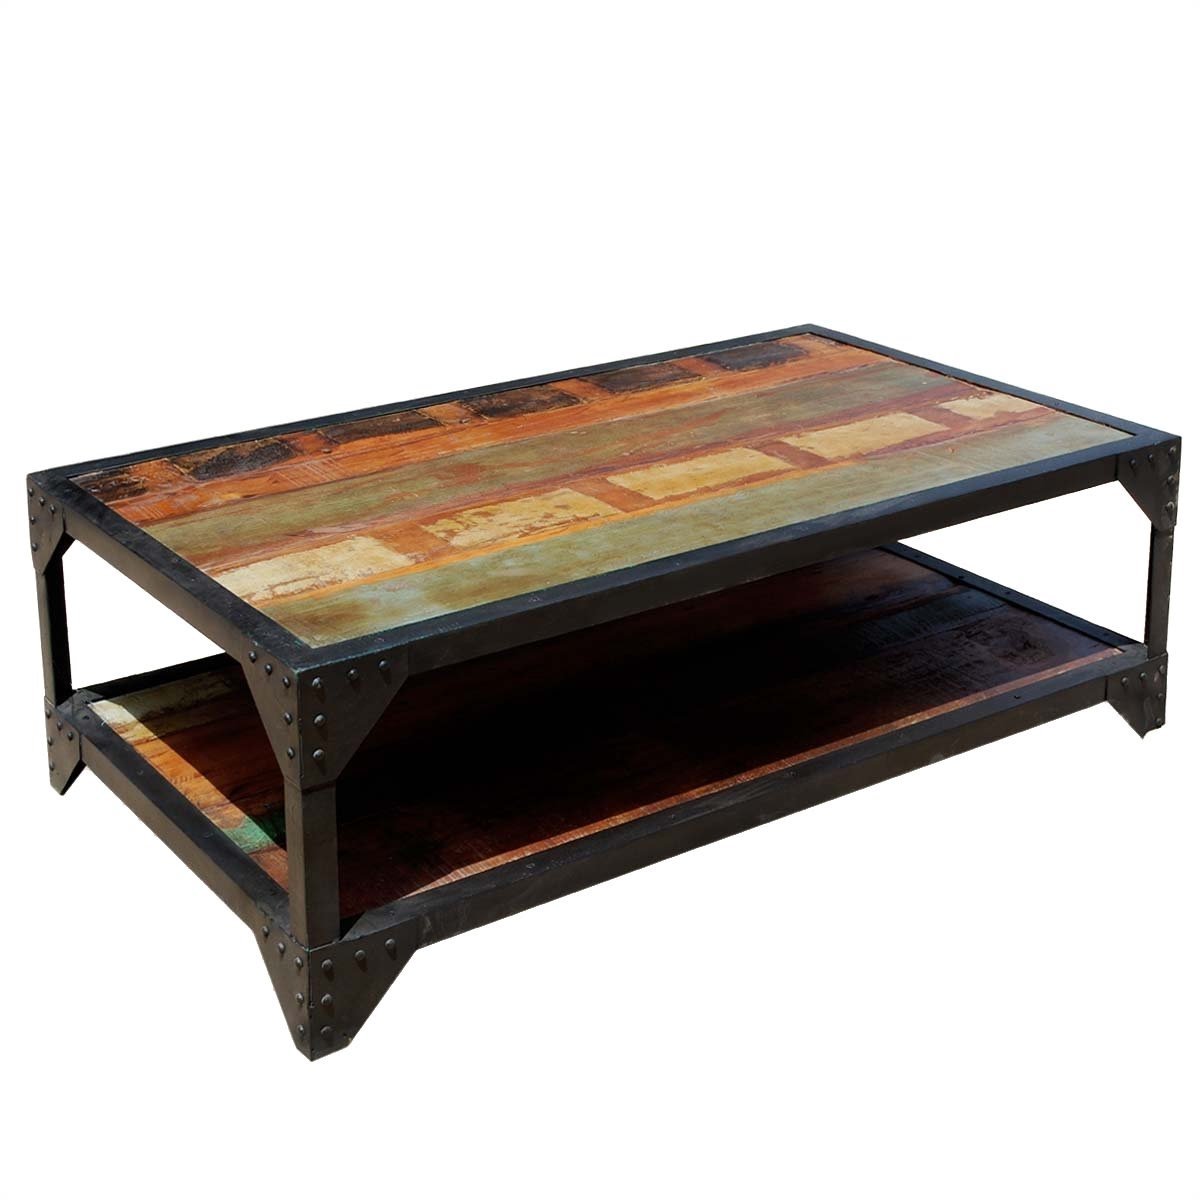 Wrought Iron Coffee Table Visualhunt, Wrought Iron And Timber Coffee Table